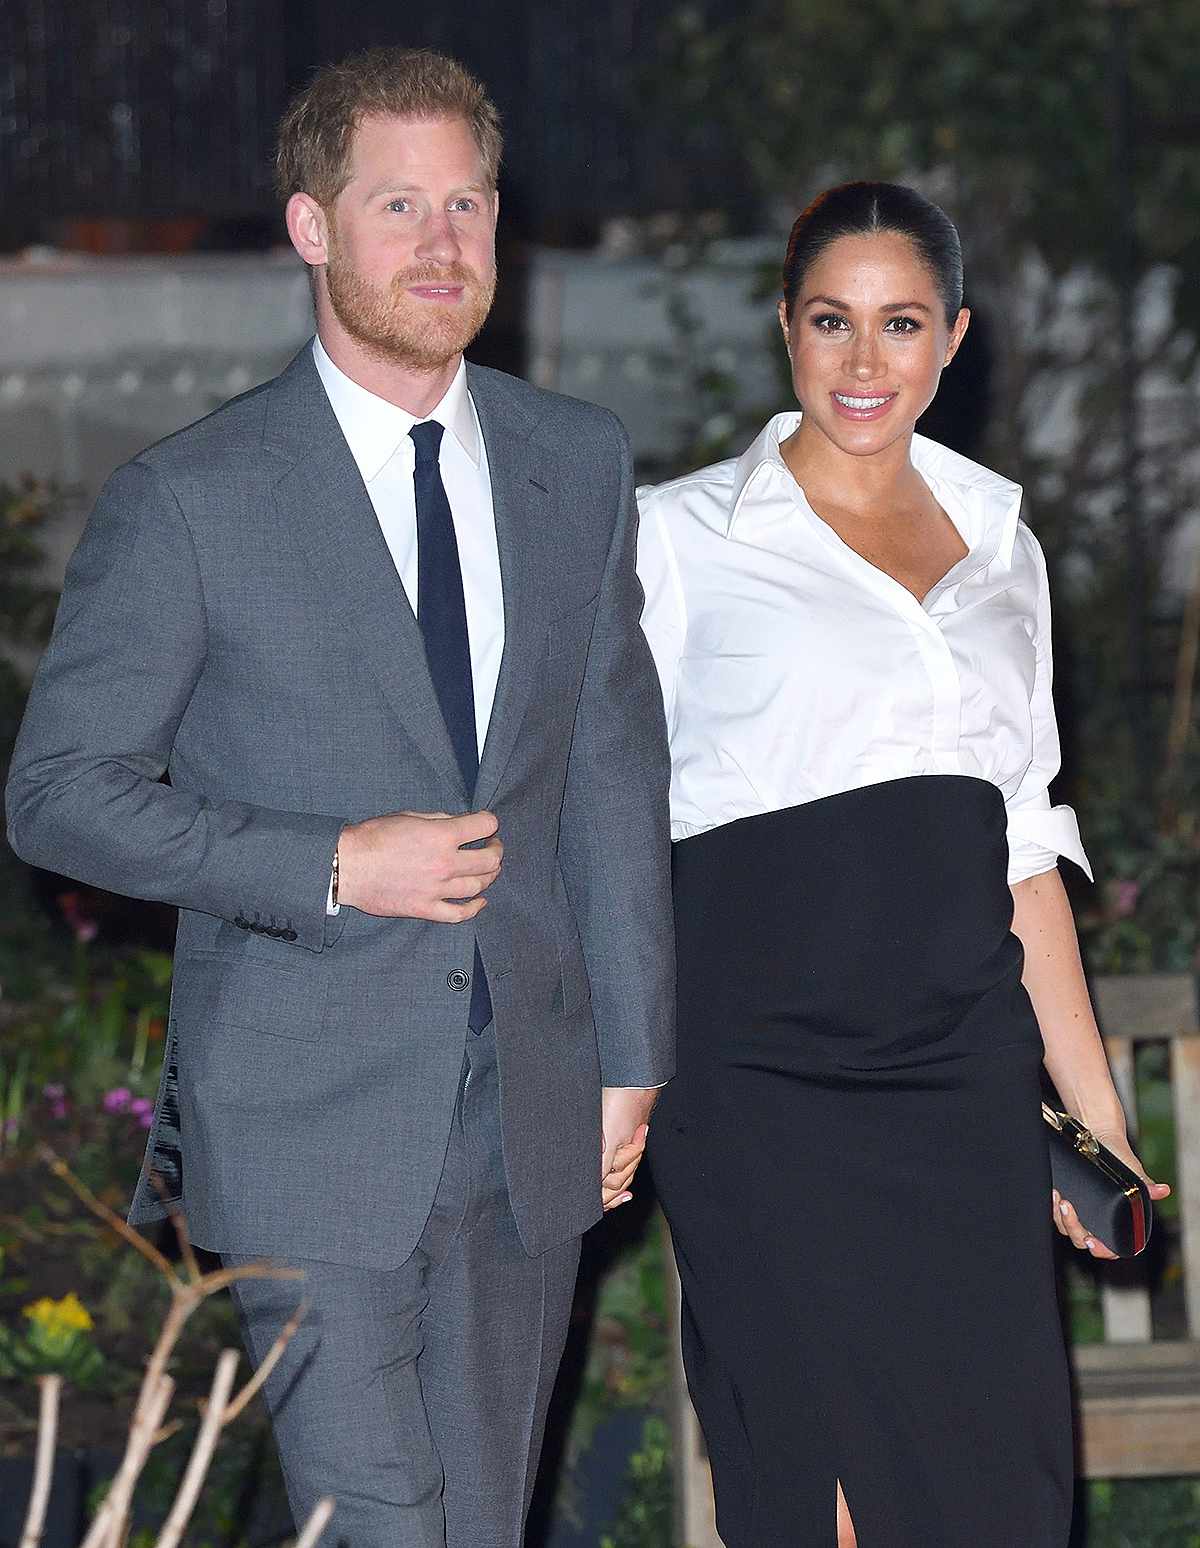 LONDON, ENGLAND - FEBRUARY 07: Prince Harry, Duke of Sussex and Meghan, Duchess of Sussex attend the Endeavour Fund Awards at Drapers Hall on February 7, 2019